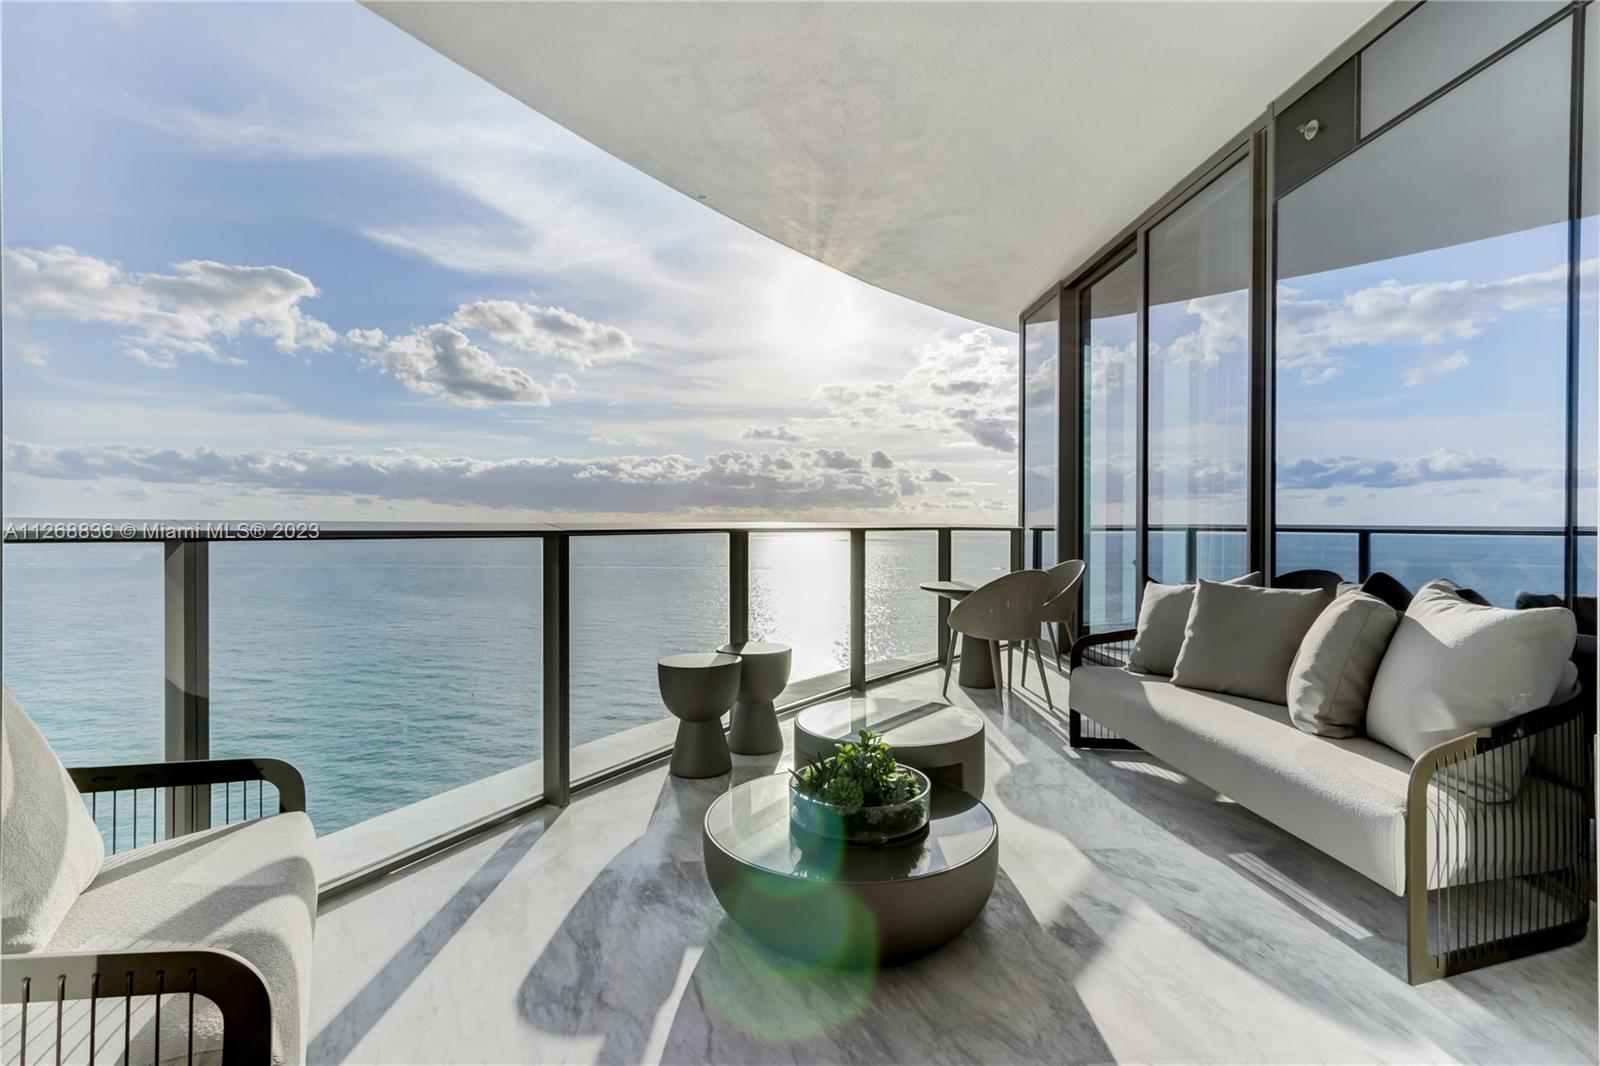 The most spectacular turn-key corner residence at Ritz Carlton Sunny Isles. Magnificent views at the ocean and intracoastal/city. The unit was finished & furnished by a renowned design firm. Luxury amenities 5 stars include 24 hours concierge, private beach access, restaurant, club level lounge, fitness center, kid's club and sunrise & sunset pools. Enjoy the top ultra-luxury lifestyle in Ritz Carlton Residences. Sale includes private storage.